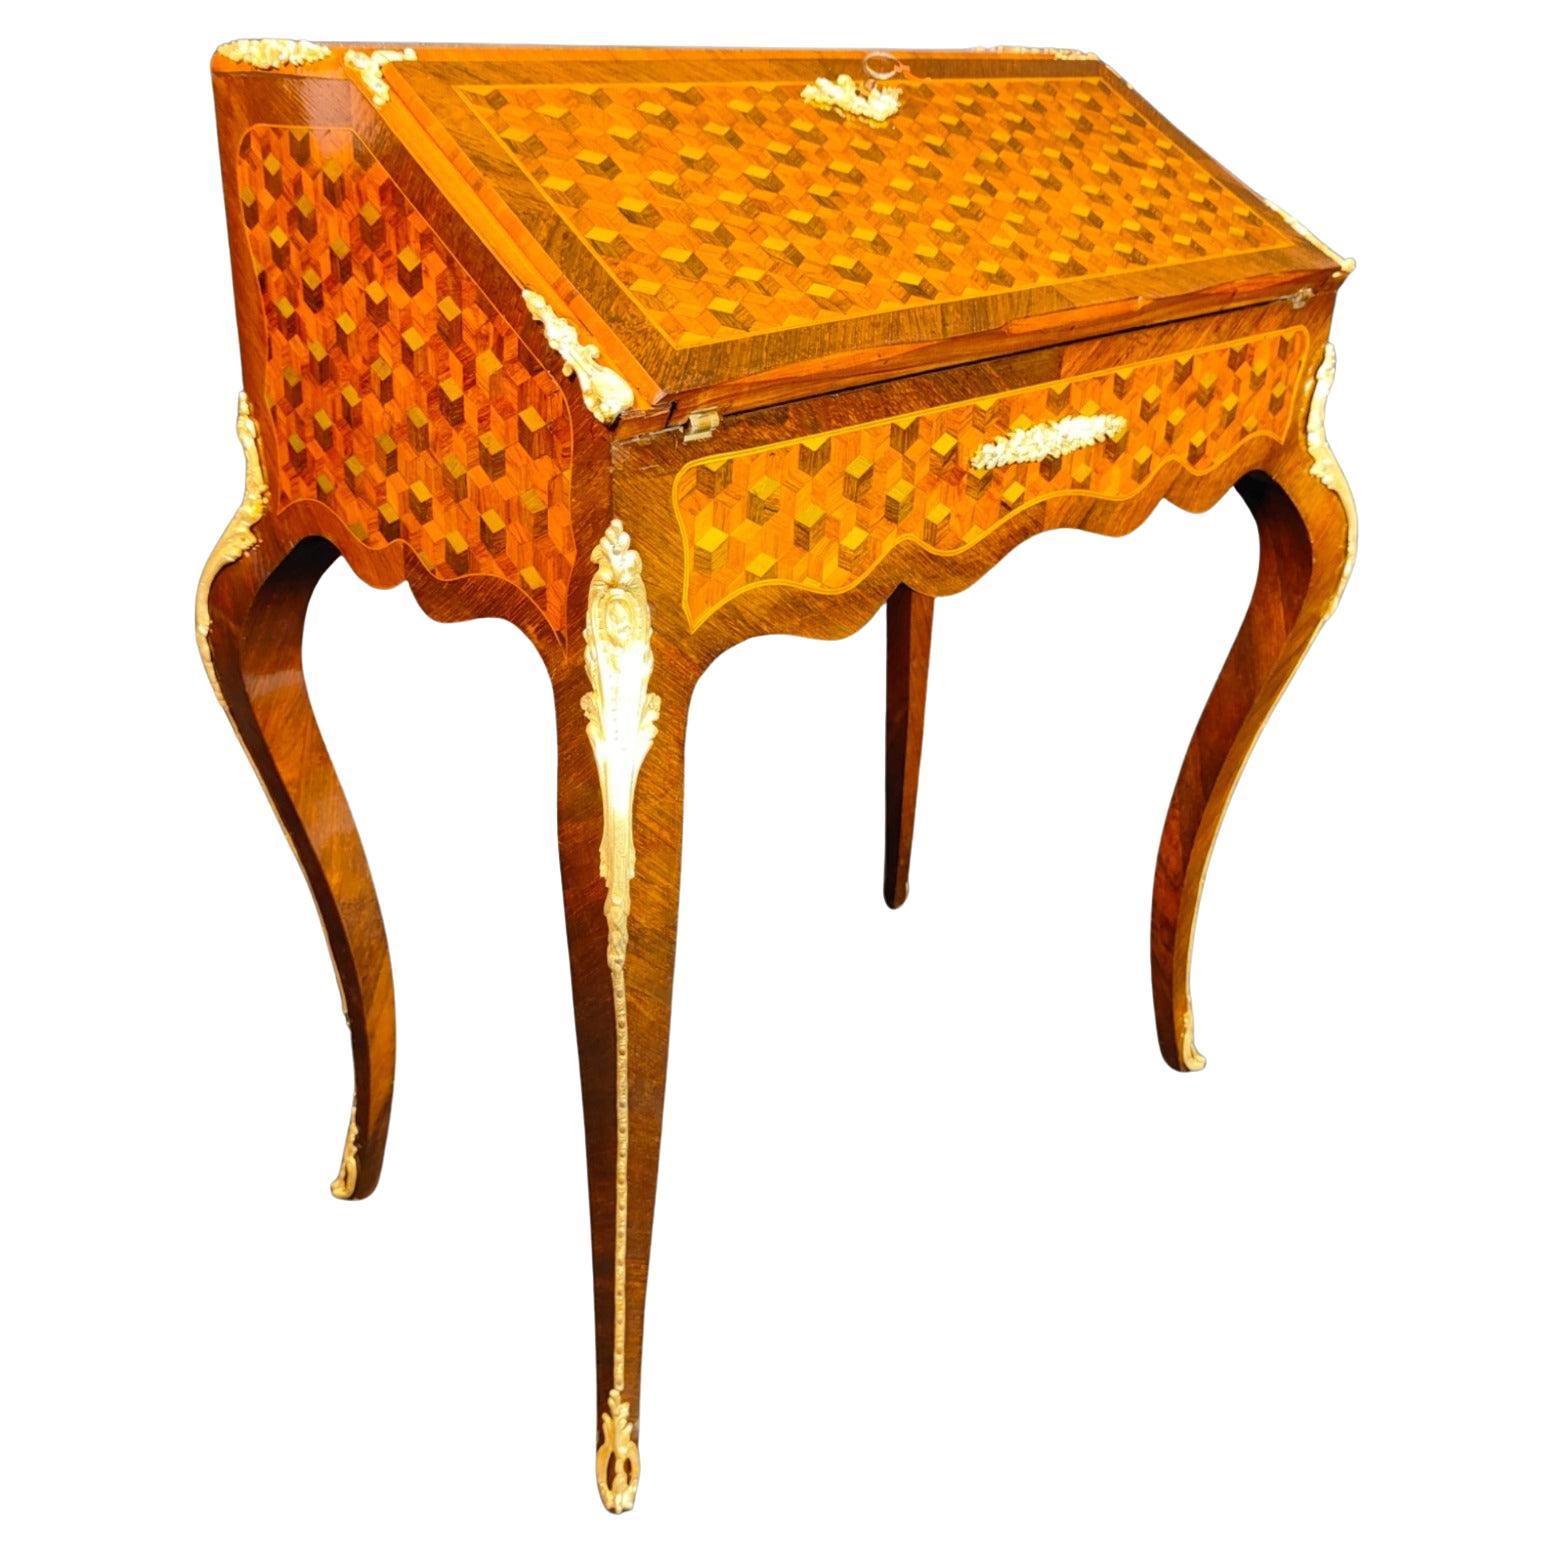 FRENCH DESK WITH XIX CENTURY MARQUETRY ELEGANT 19th CENTURY 